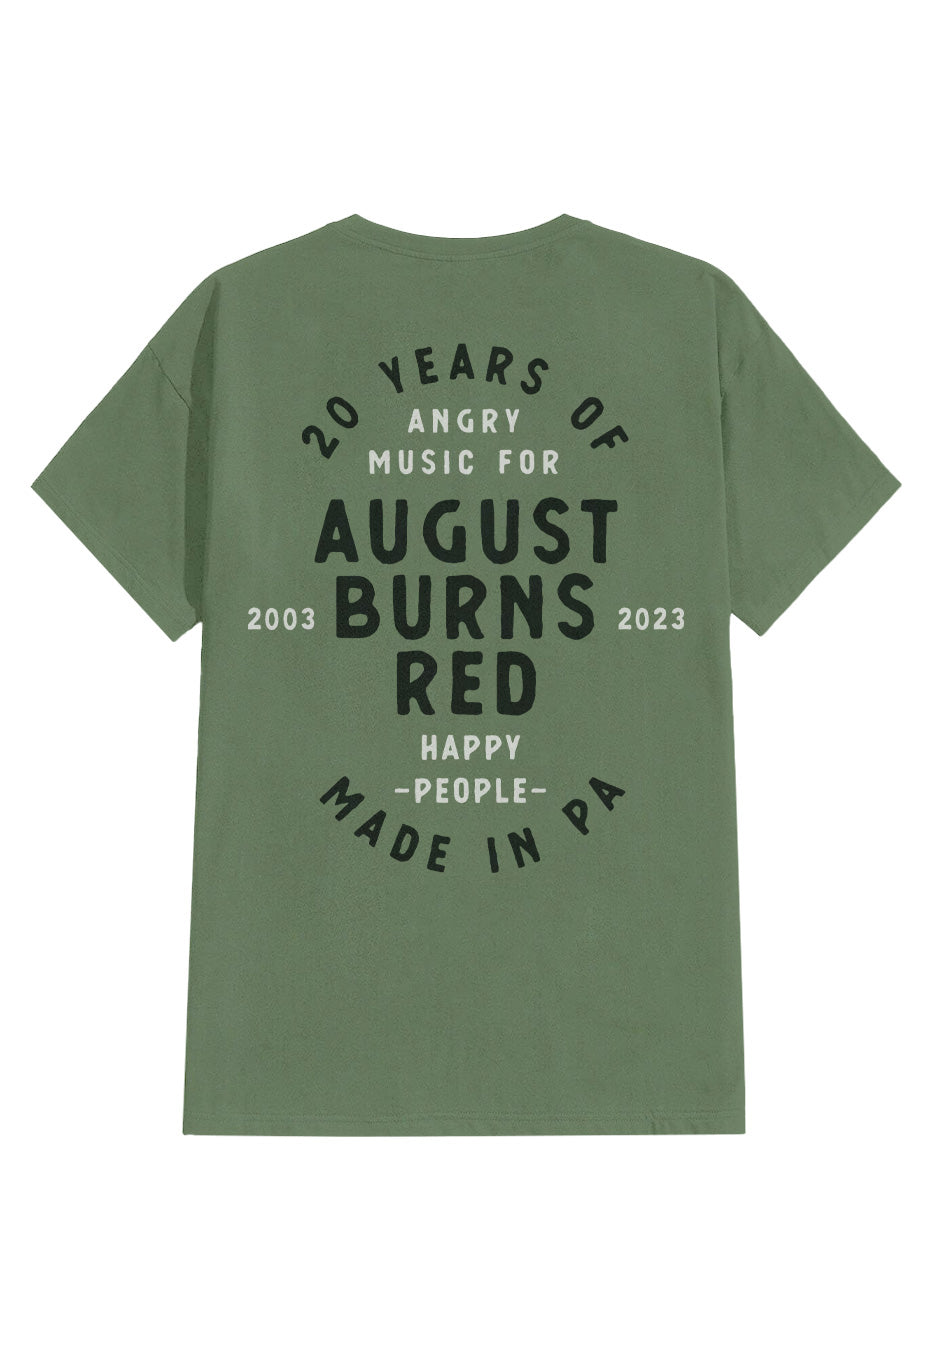 August Burns Red - 20 Years Angry Music Military Green - T-Shirt | Neutral-Image